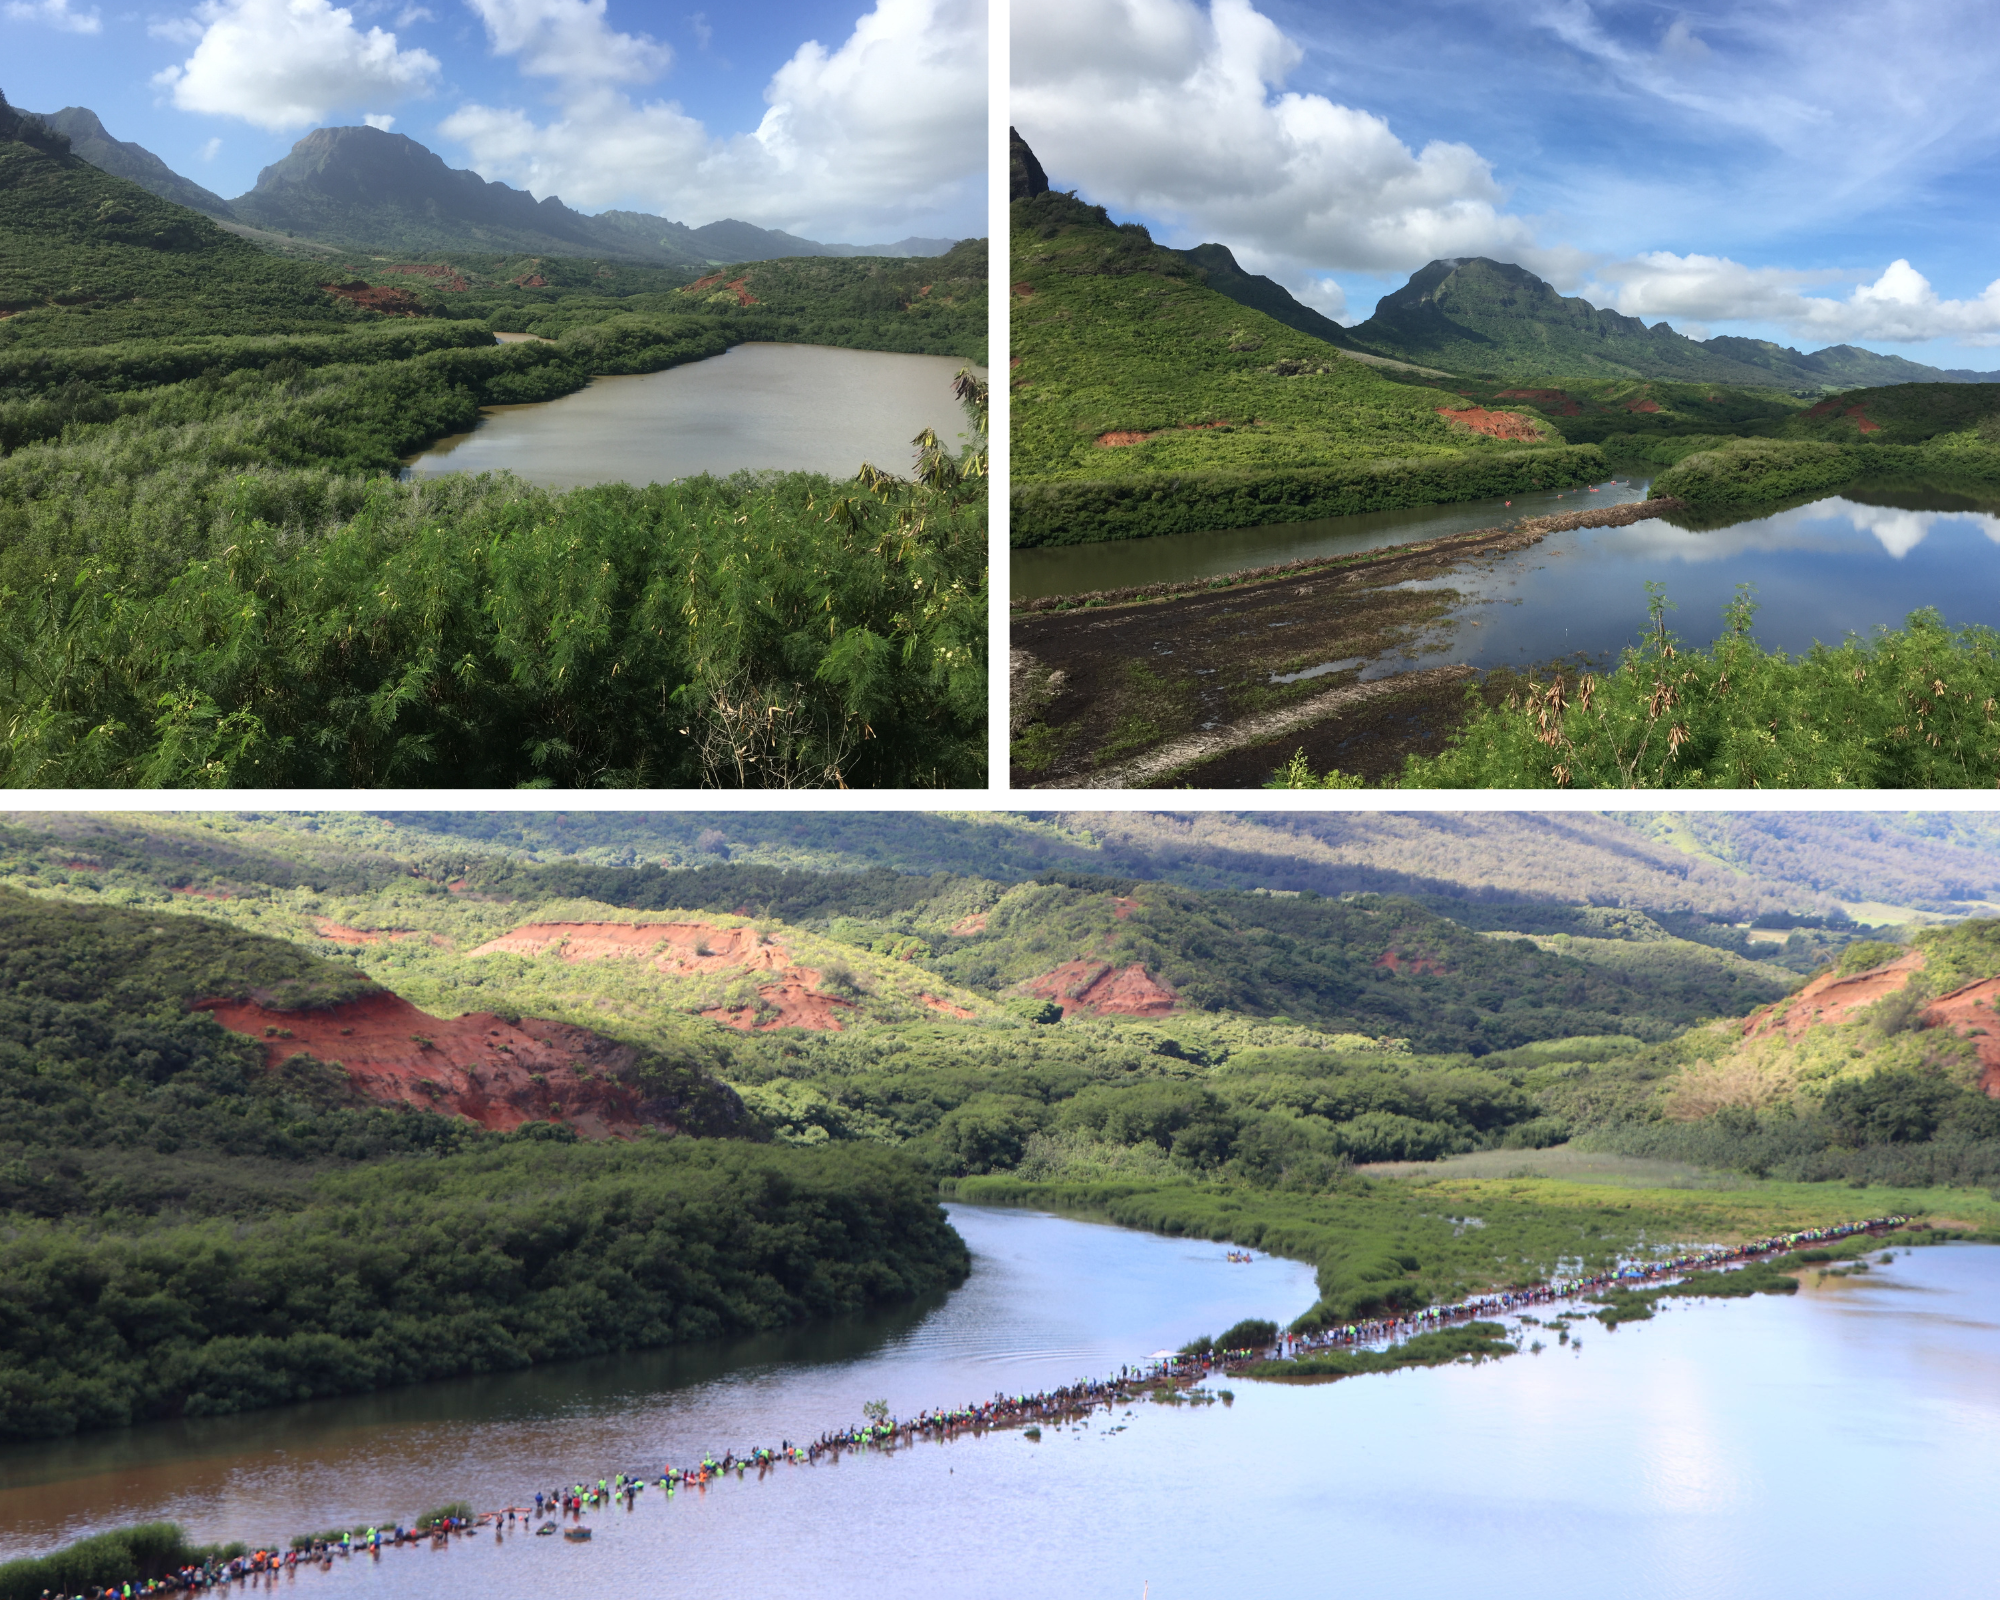 Top Left to Right: Alakoko Fishpond in December 2018, photo taken from the lookout showing it overgrown with mangrove; Alakoko Fishpond in August 2019, photo taken from the lookout showing mid-waypoint of mangrove removal project (approximately 2/3rds of wall cleared). Photos courtesy of Mālama Hulē'i‘a. Bottom: Aerial Shot of the Alakoko Fishpond Community Workday on October 21, 2023. Photo courtesy of Daniel Dennison from DLNR.